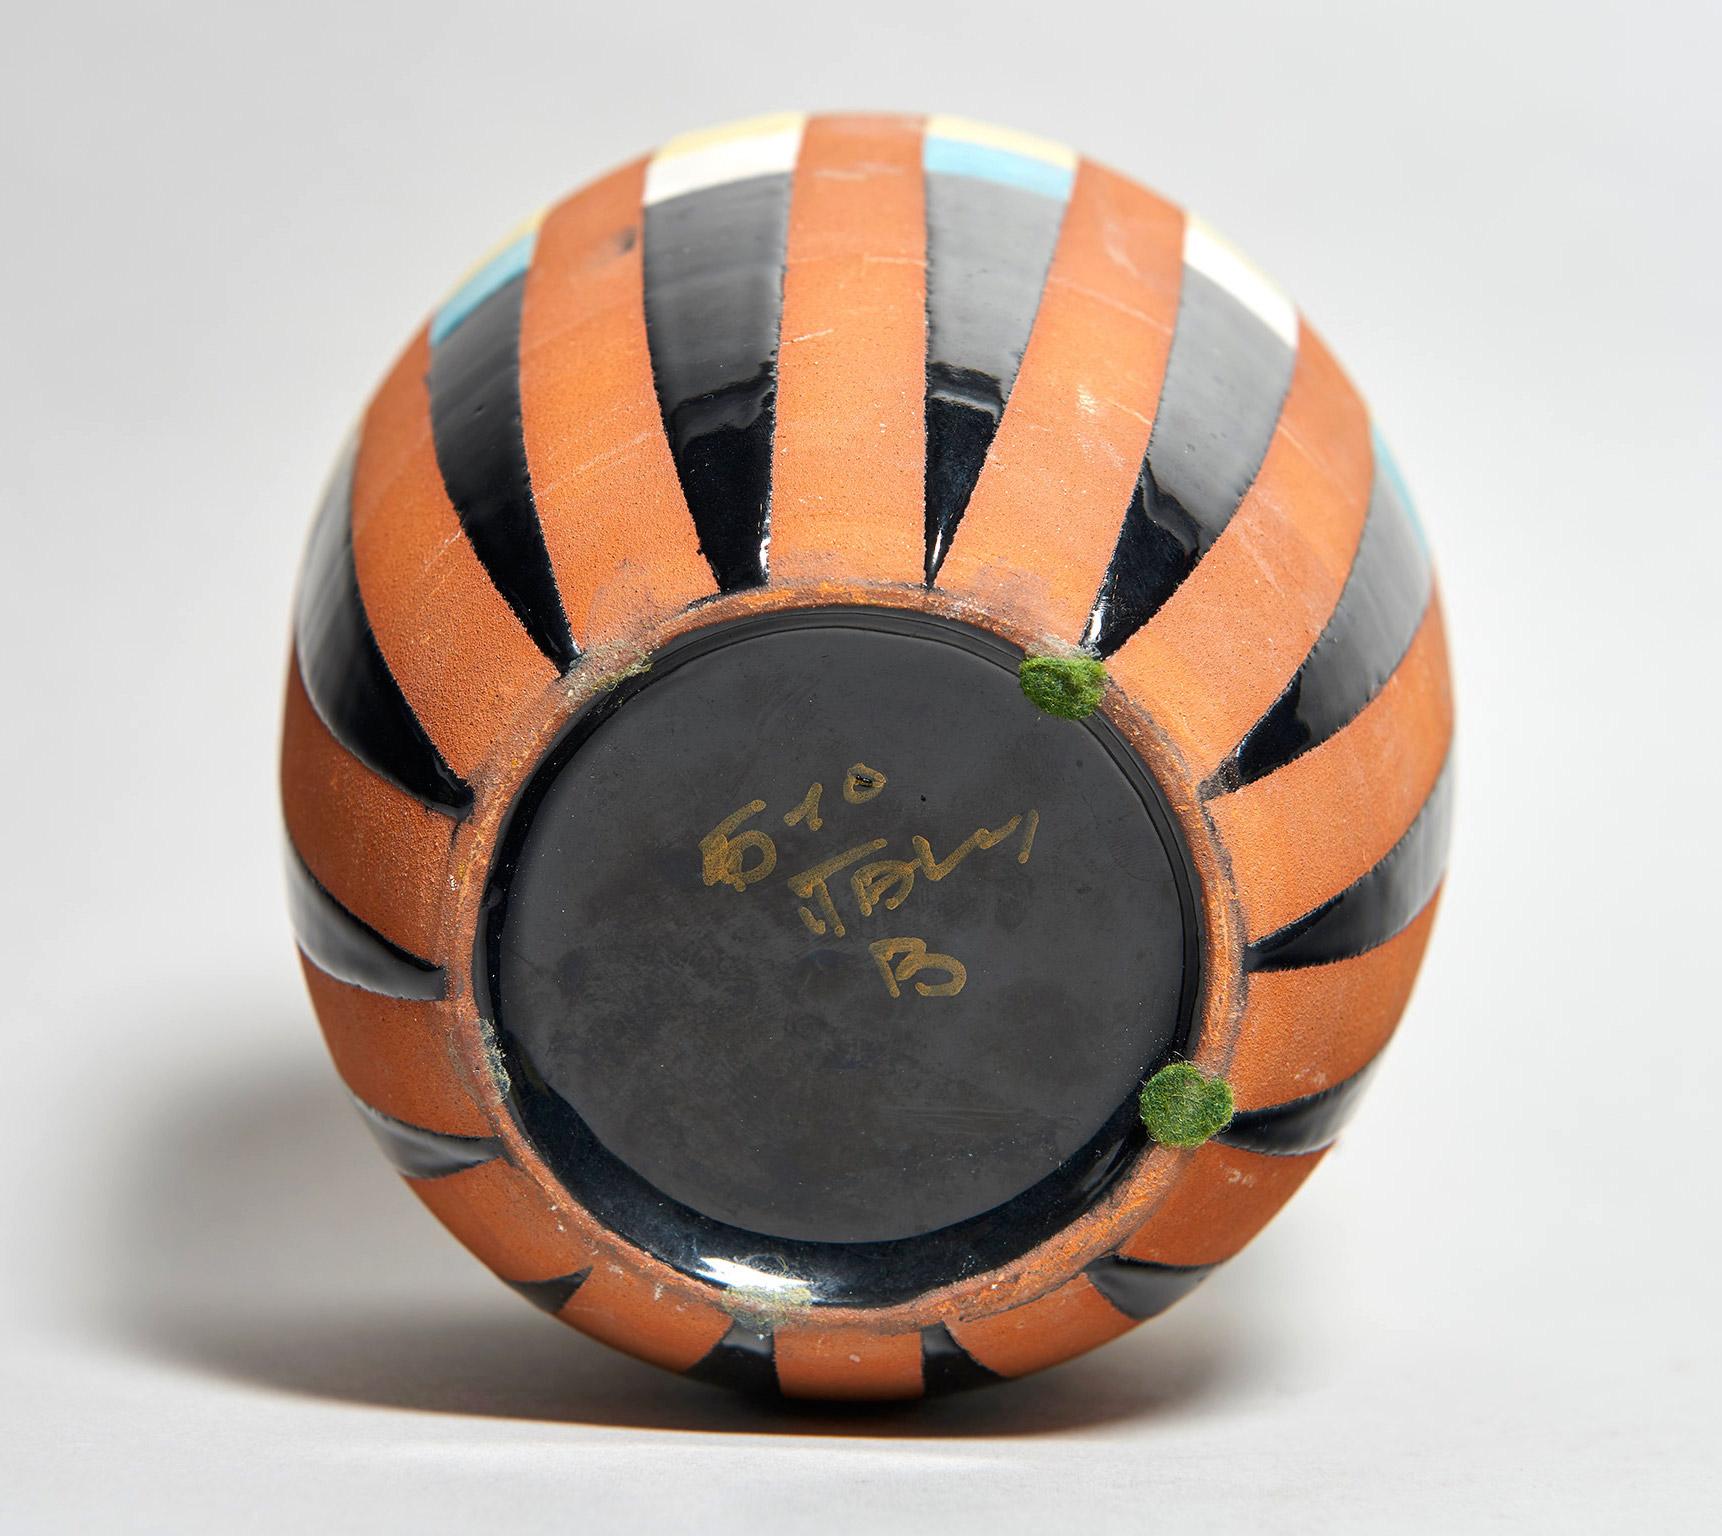 Glazed Bitossi Vase Attributed to Ettore Sottsass, circa 1958 For Sale